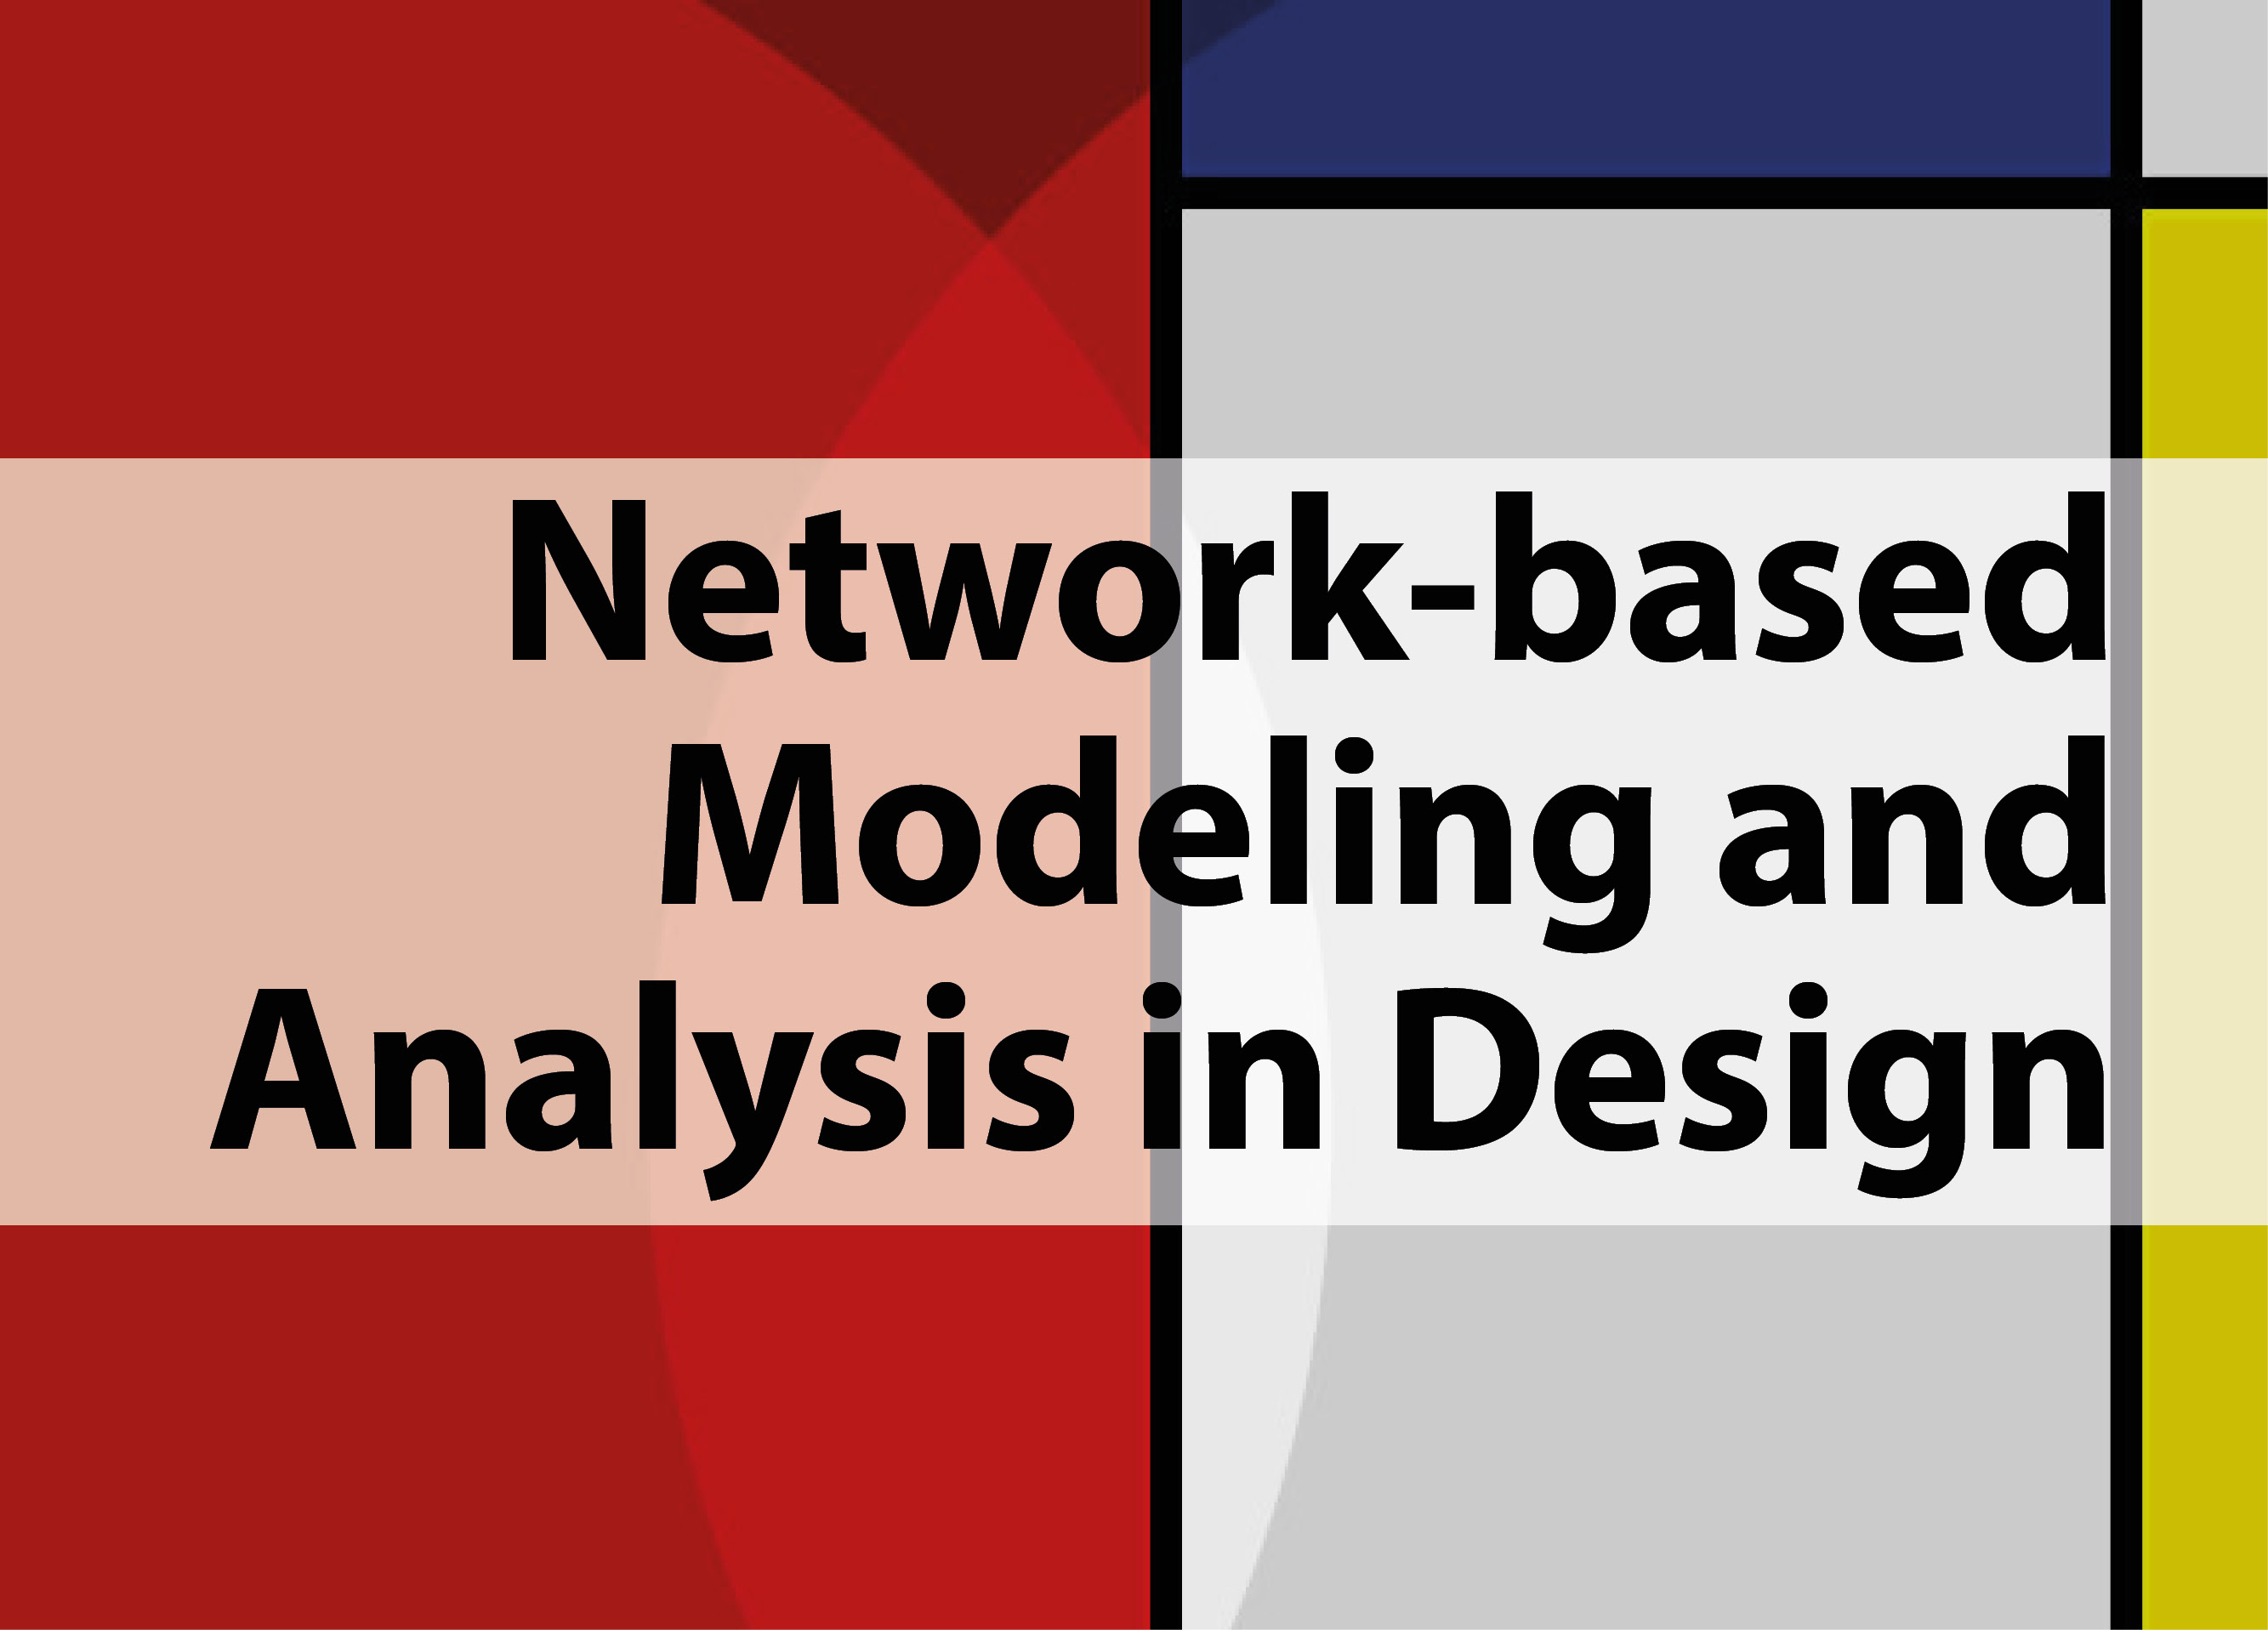 Network-based Modeling and Analysis in Design